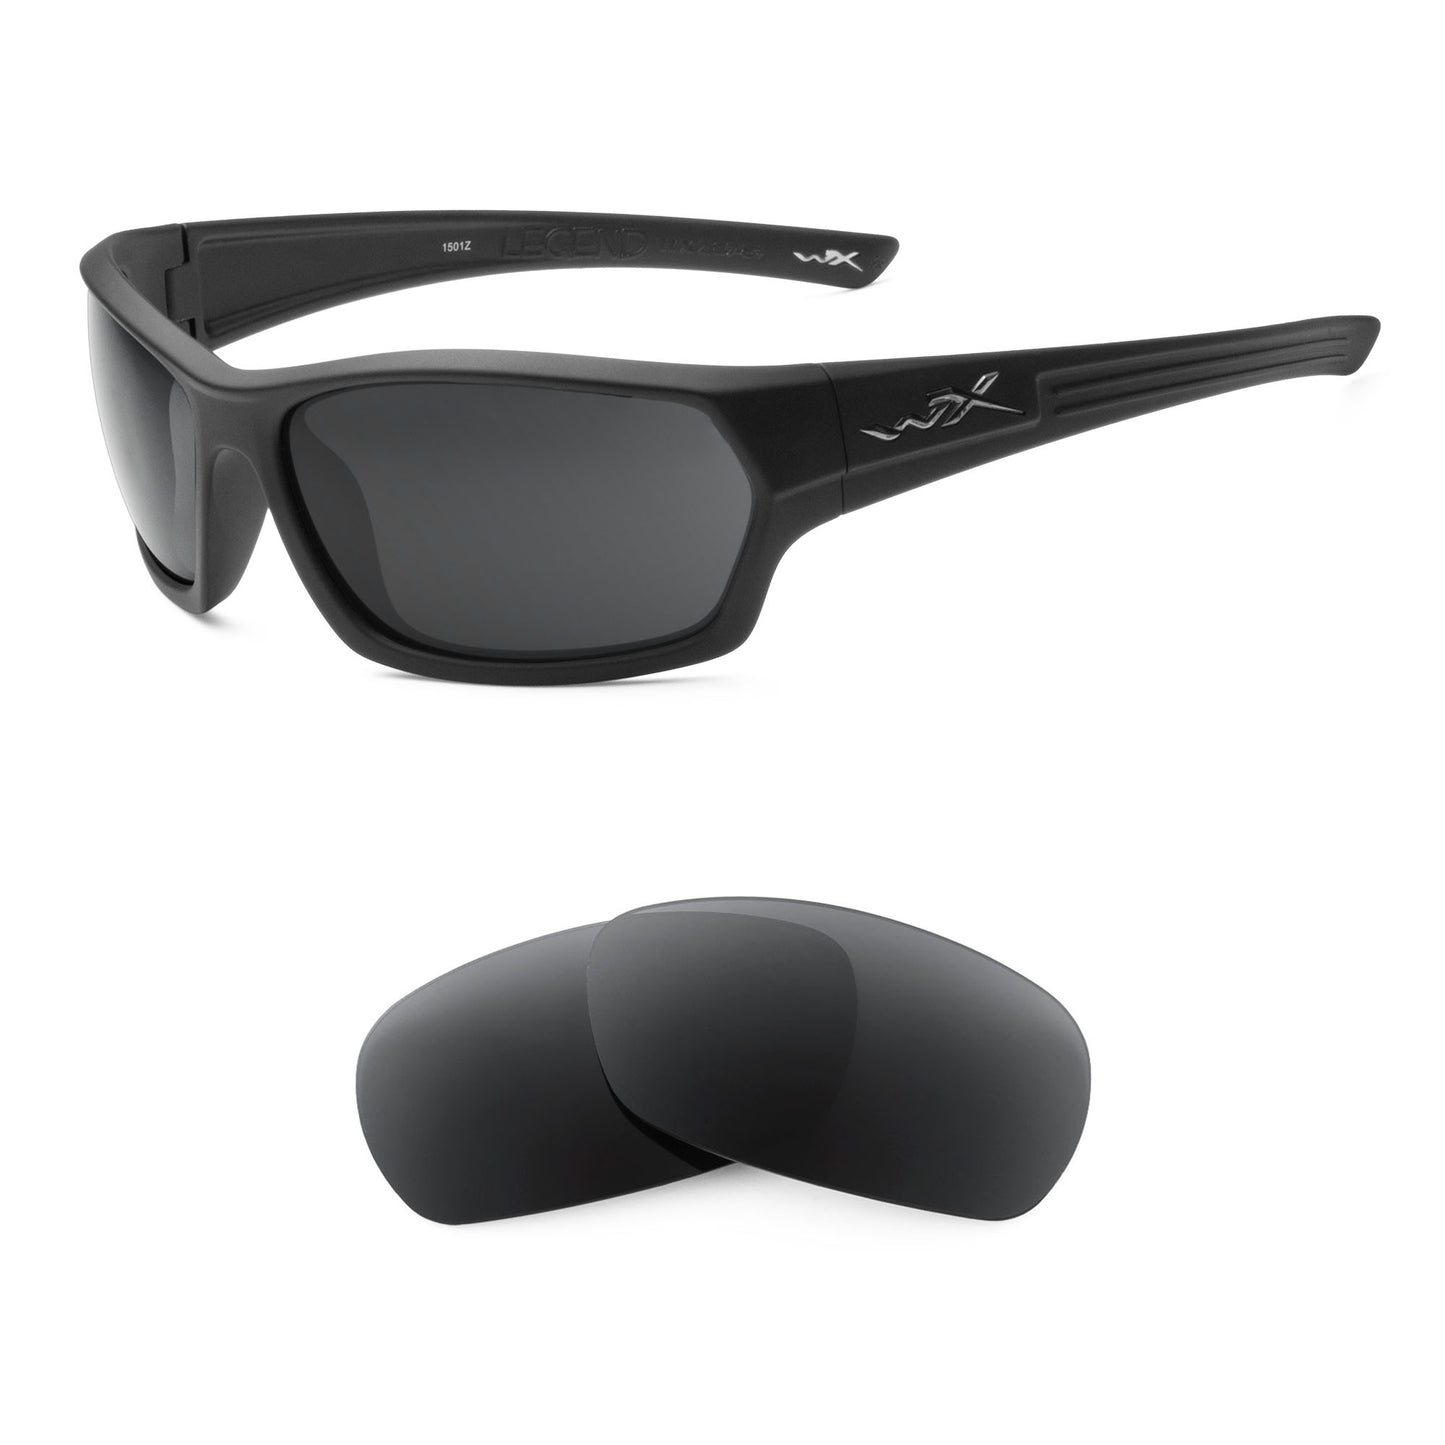 Wiley X Legend sunglasses with replacement lenses